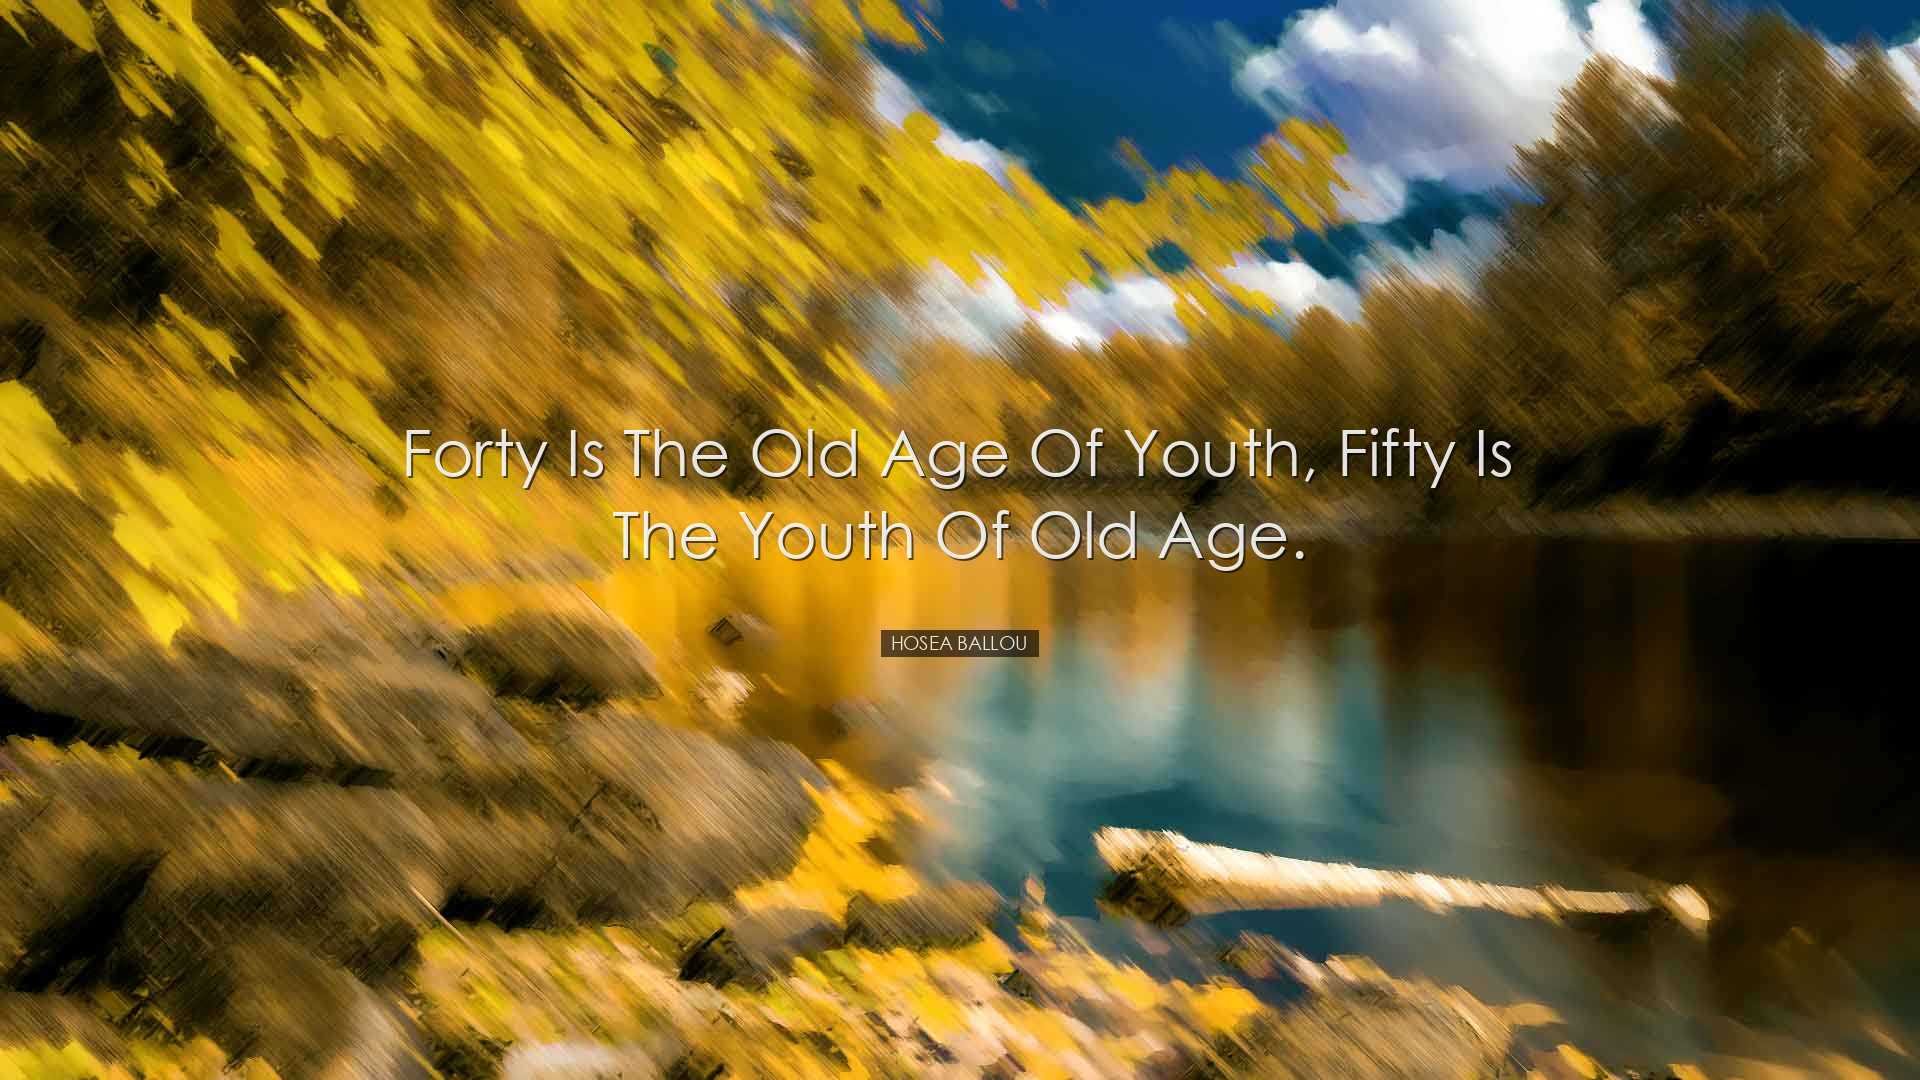 Forty is the old age of youth, fifty is the youth of old age. - Ho